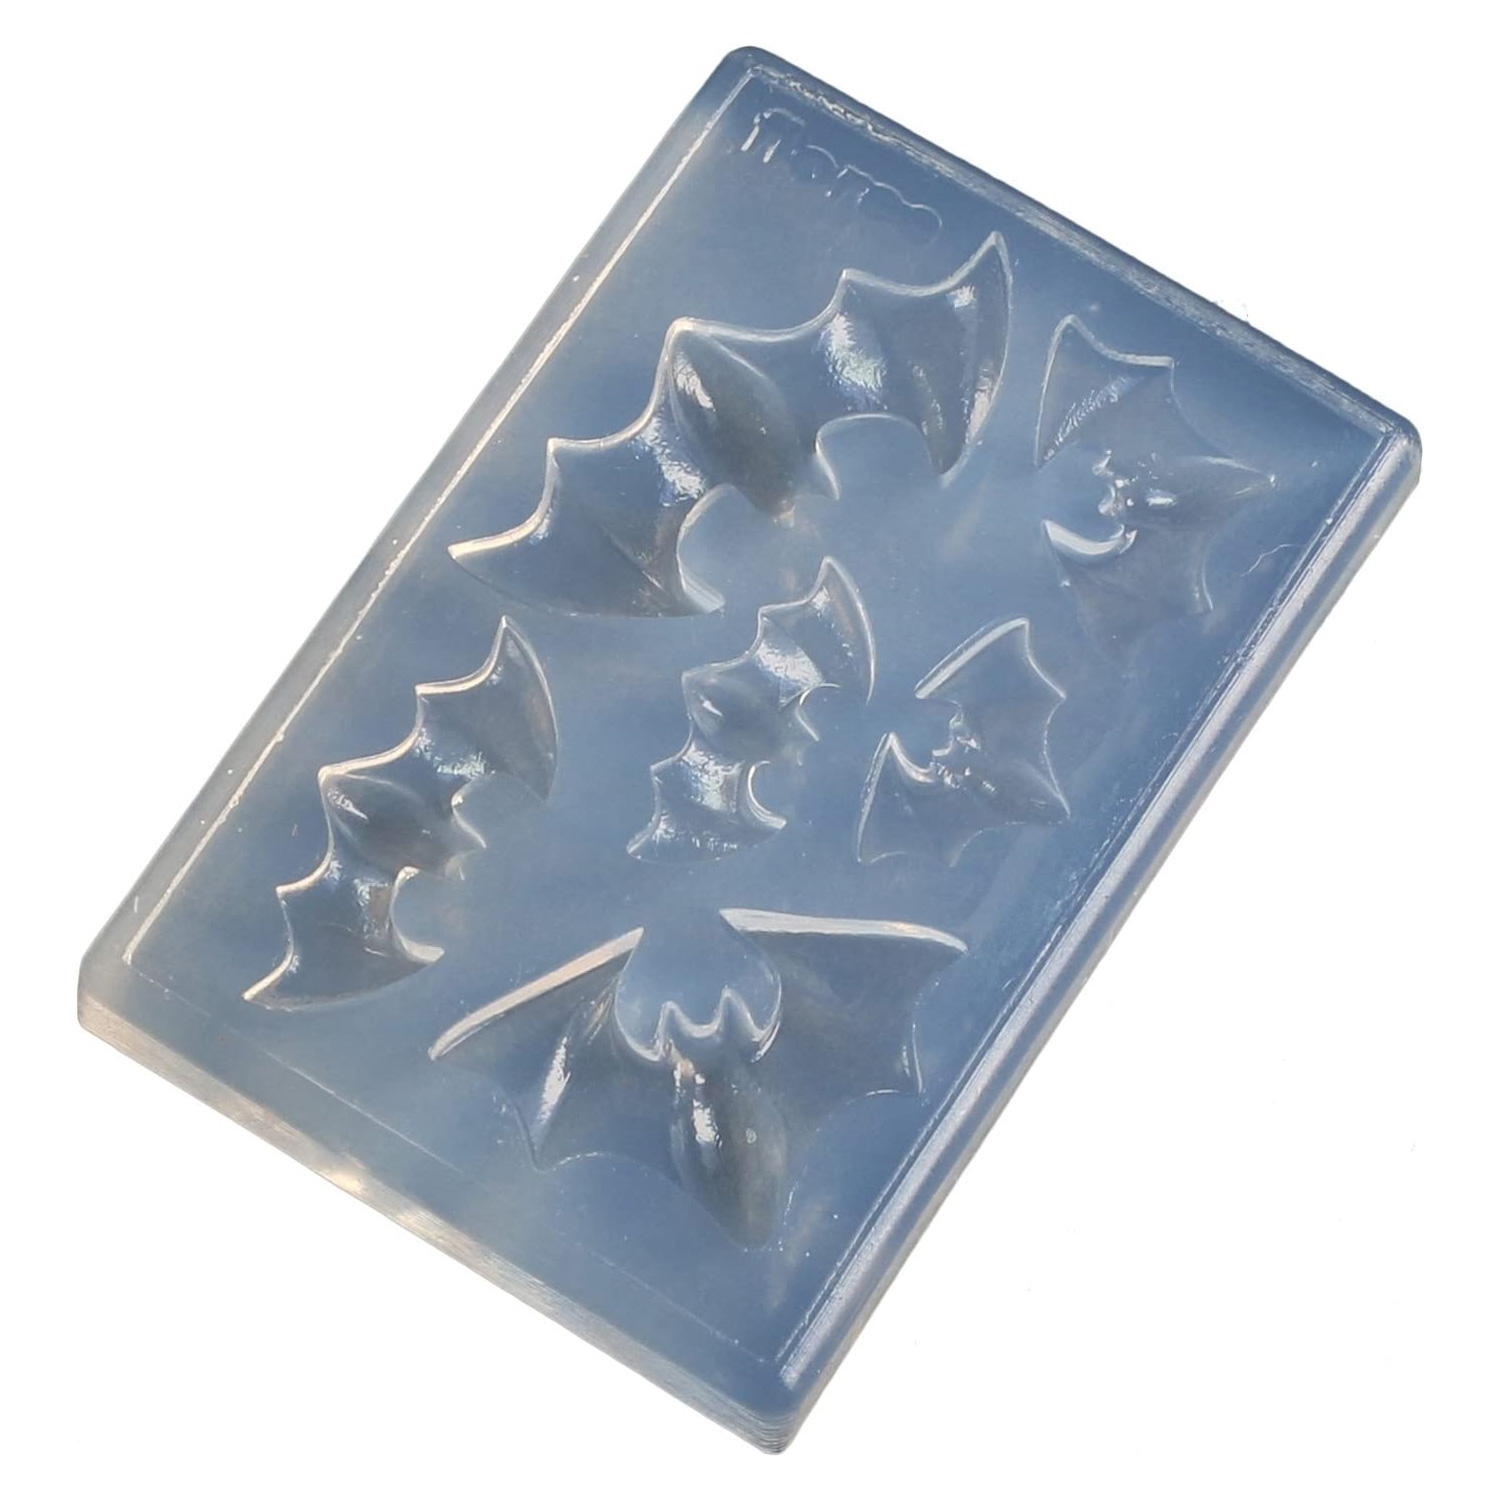 KAM-REJ-512  Resin Crafting Silicone Mold  (pcs)